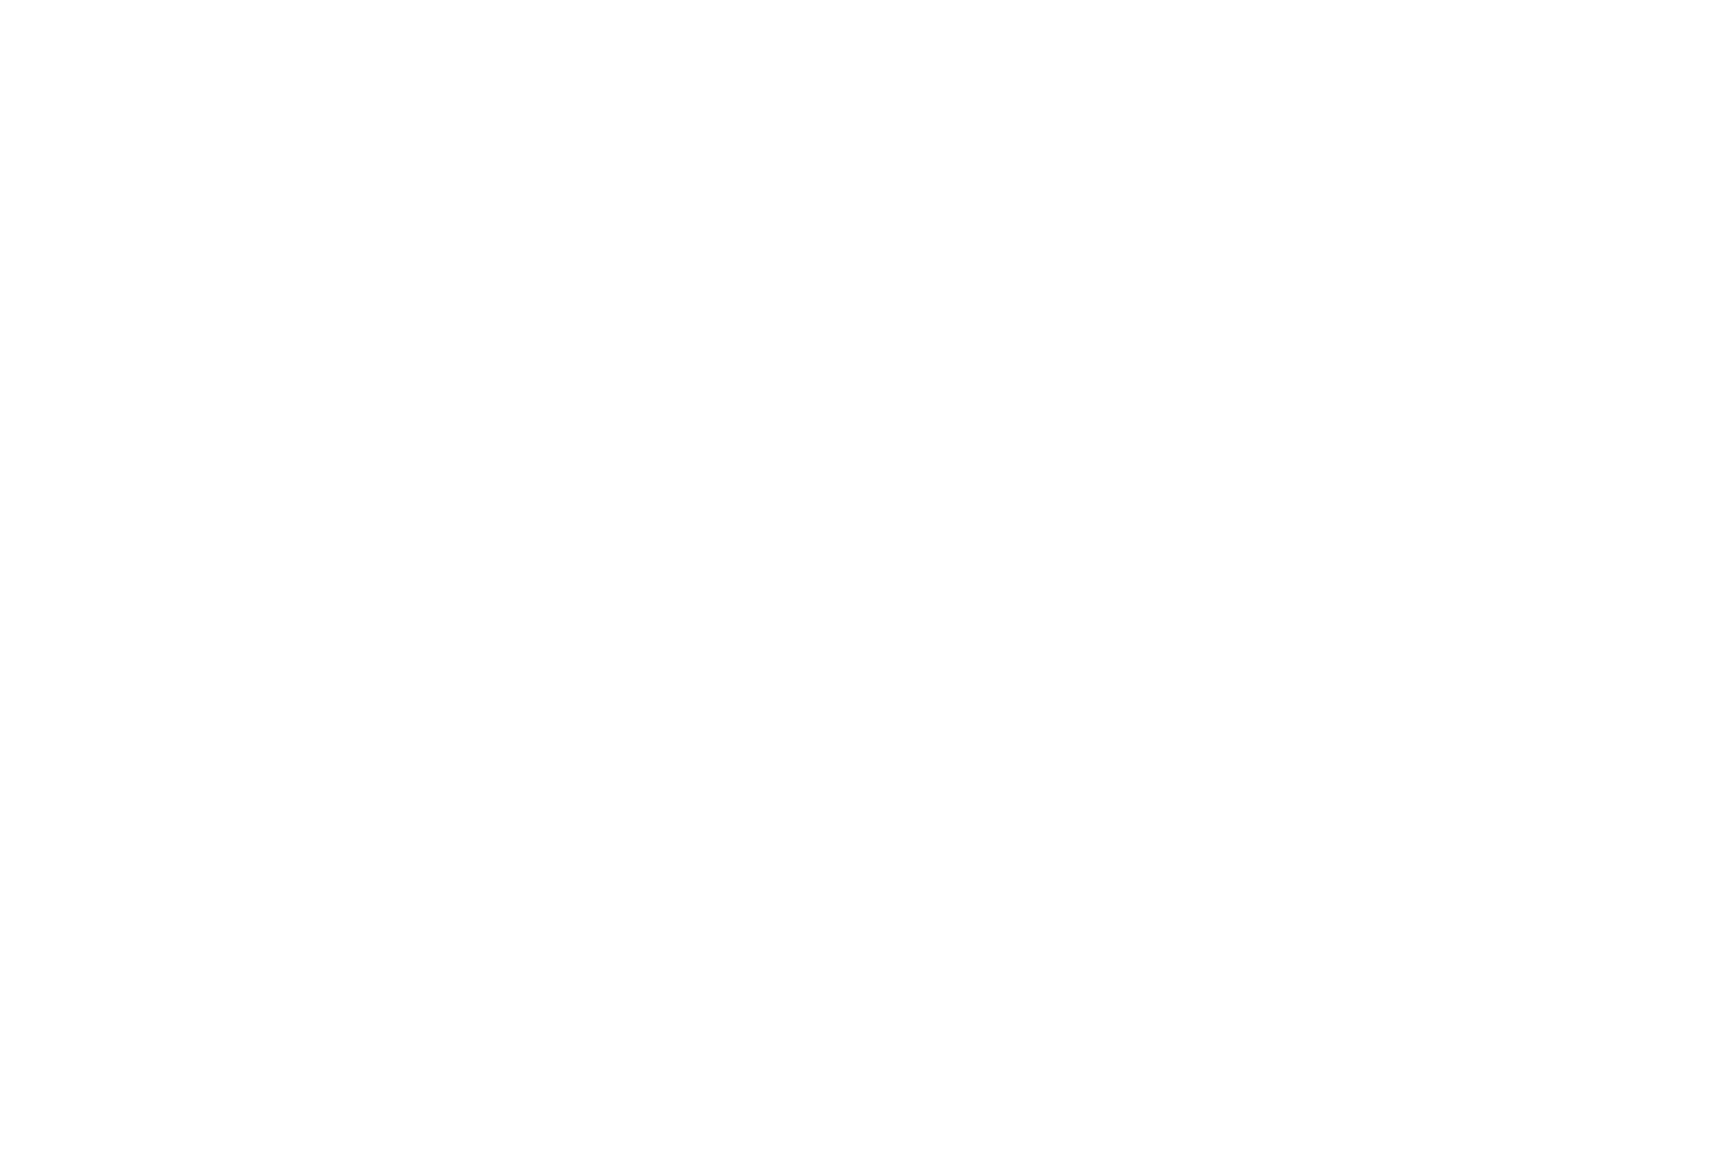 OFFICIAL SELECTION - Twin Cities Film Festival - 2018